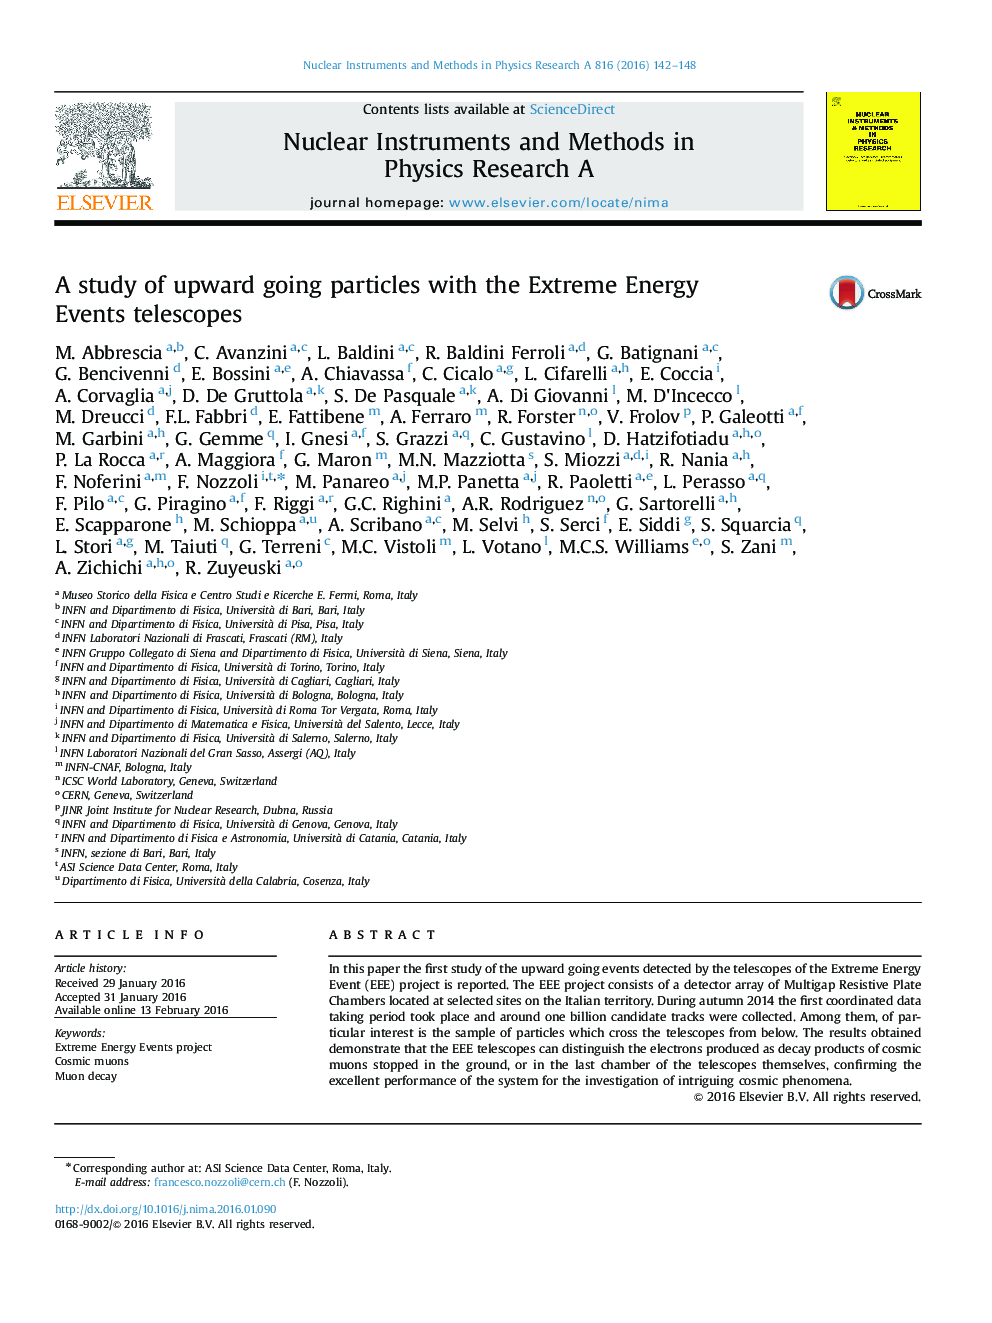 A study of upward going particles with the Extreme Energy Events telescopes